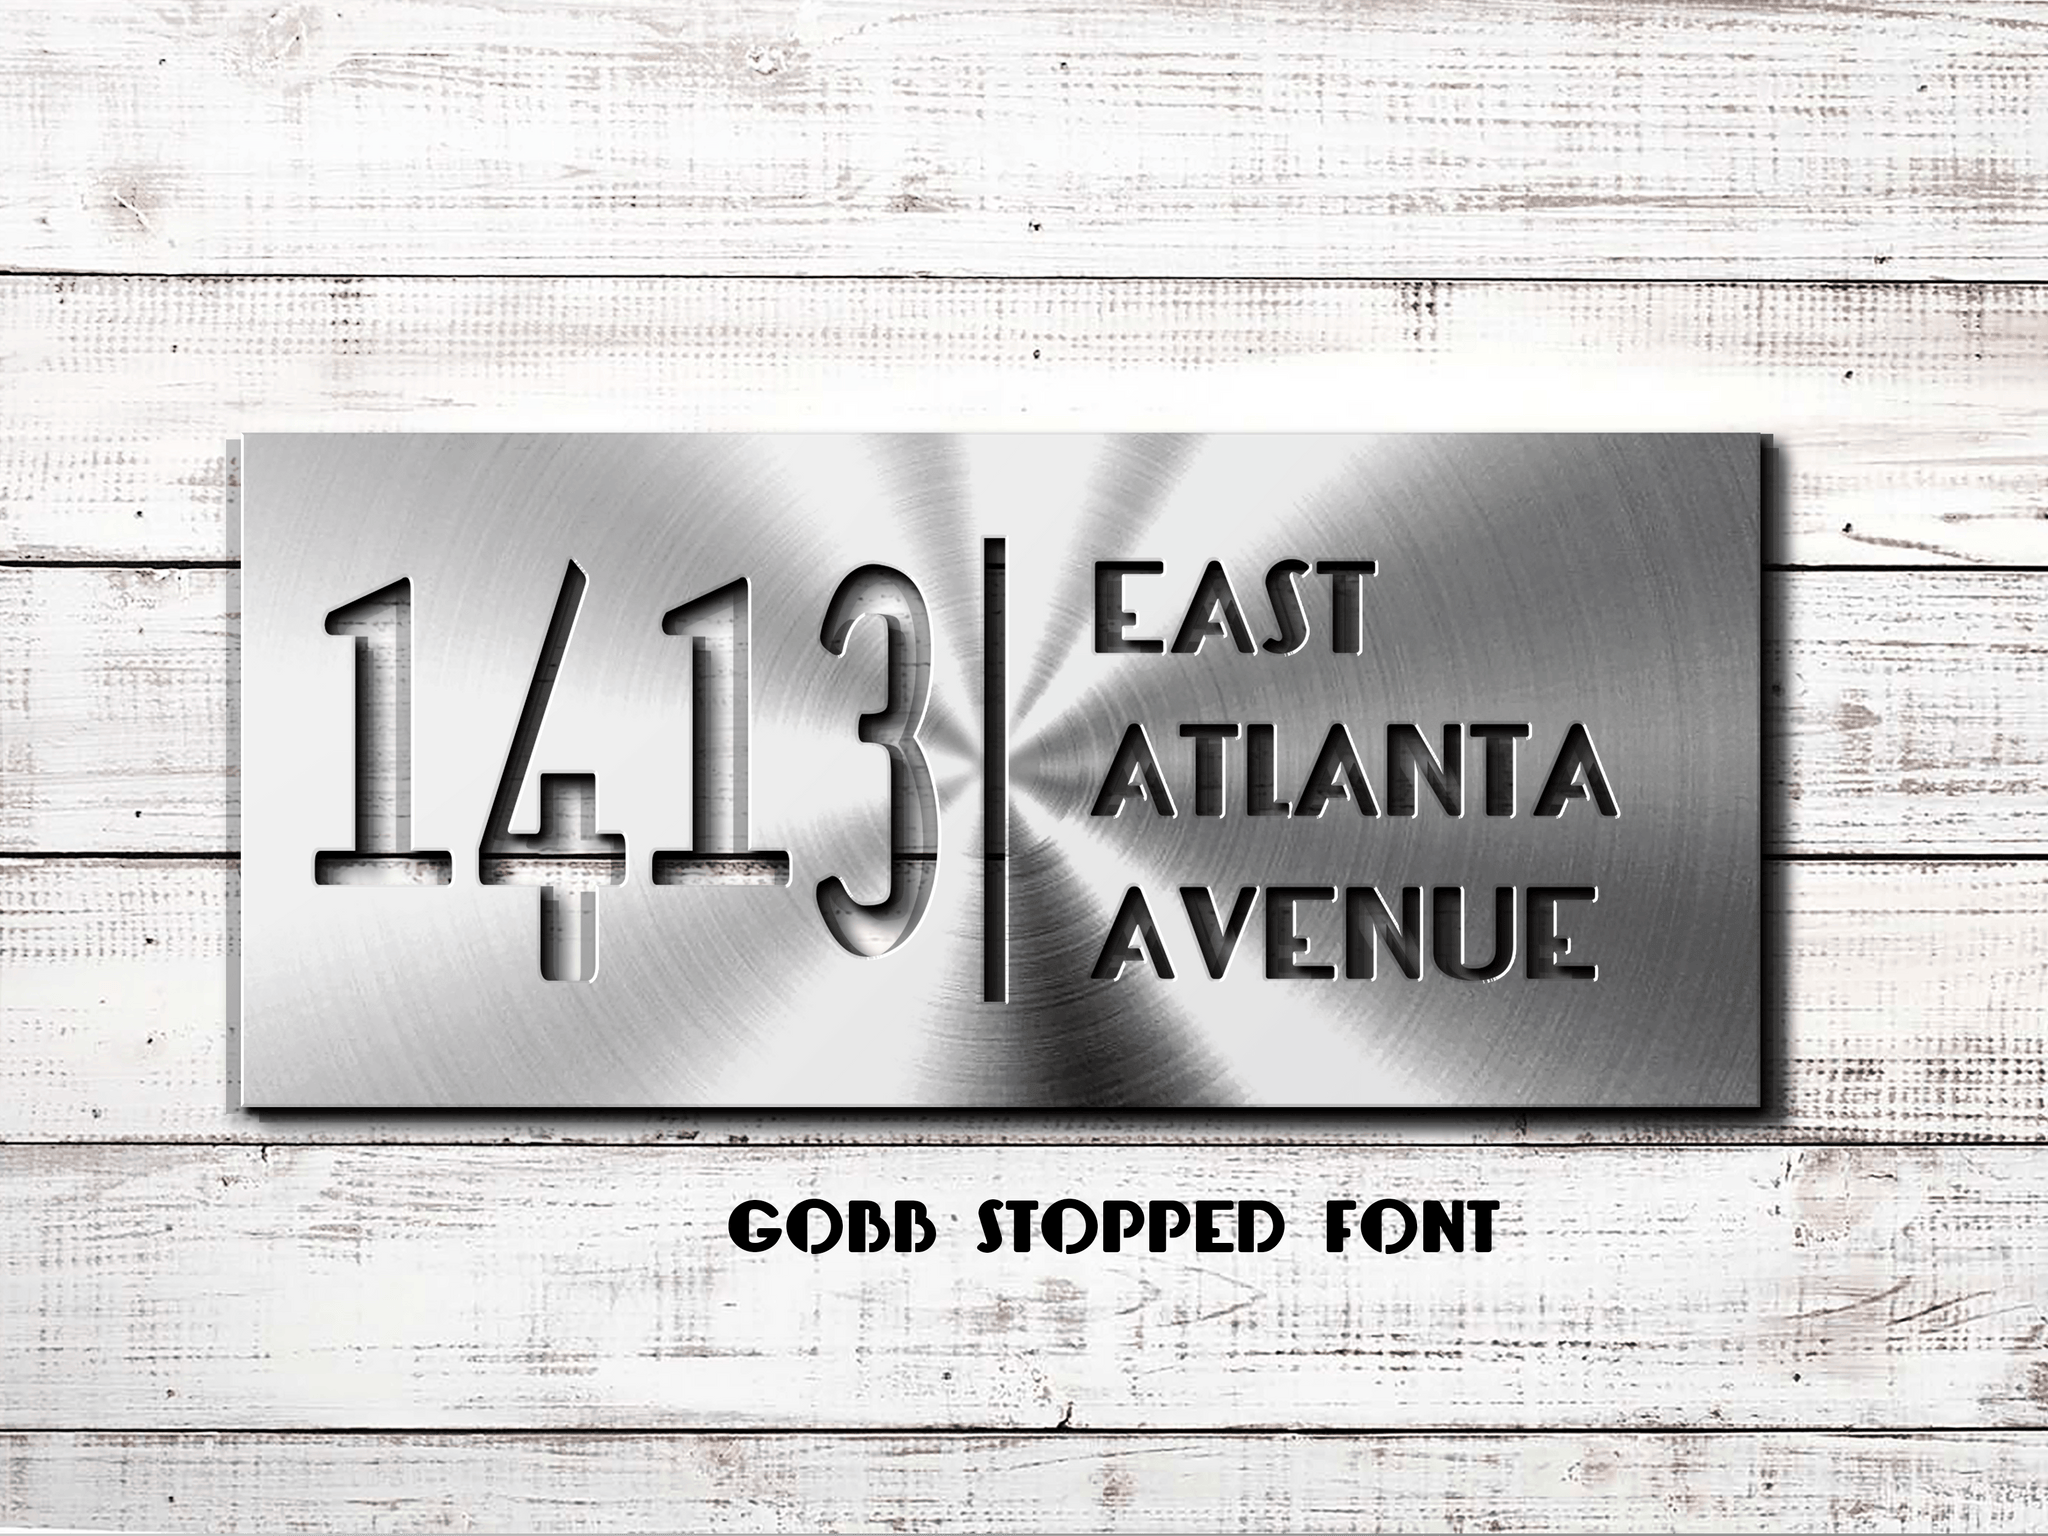 Metal House Numbers, Address Plaque, Personalized Gifts, Custom Metal  Address Sign, Metal Numbers, Home Decor 